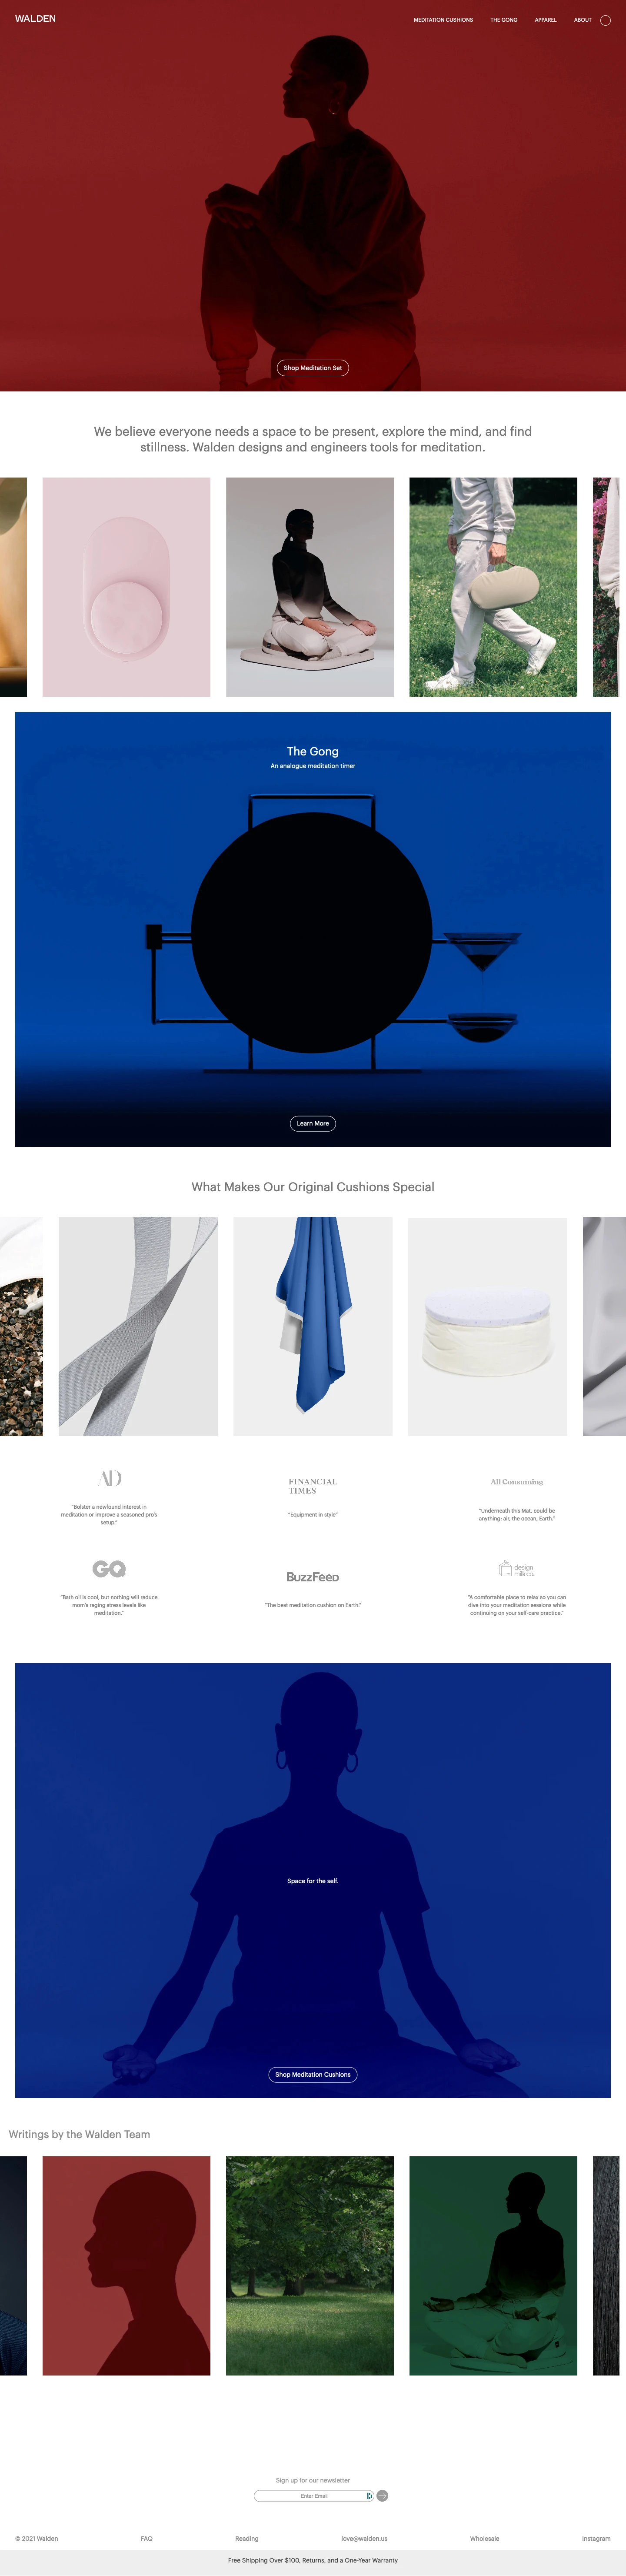 Walden Landing Page Example: We create products to inspire ritual, encourage the present moment, and honor tactility. Everyone needs a space for the self.